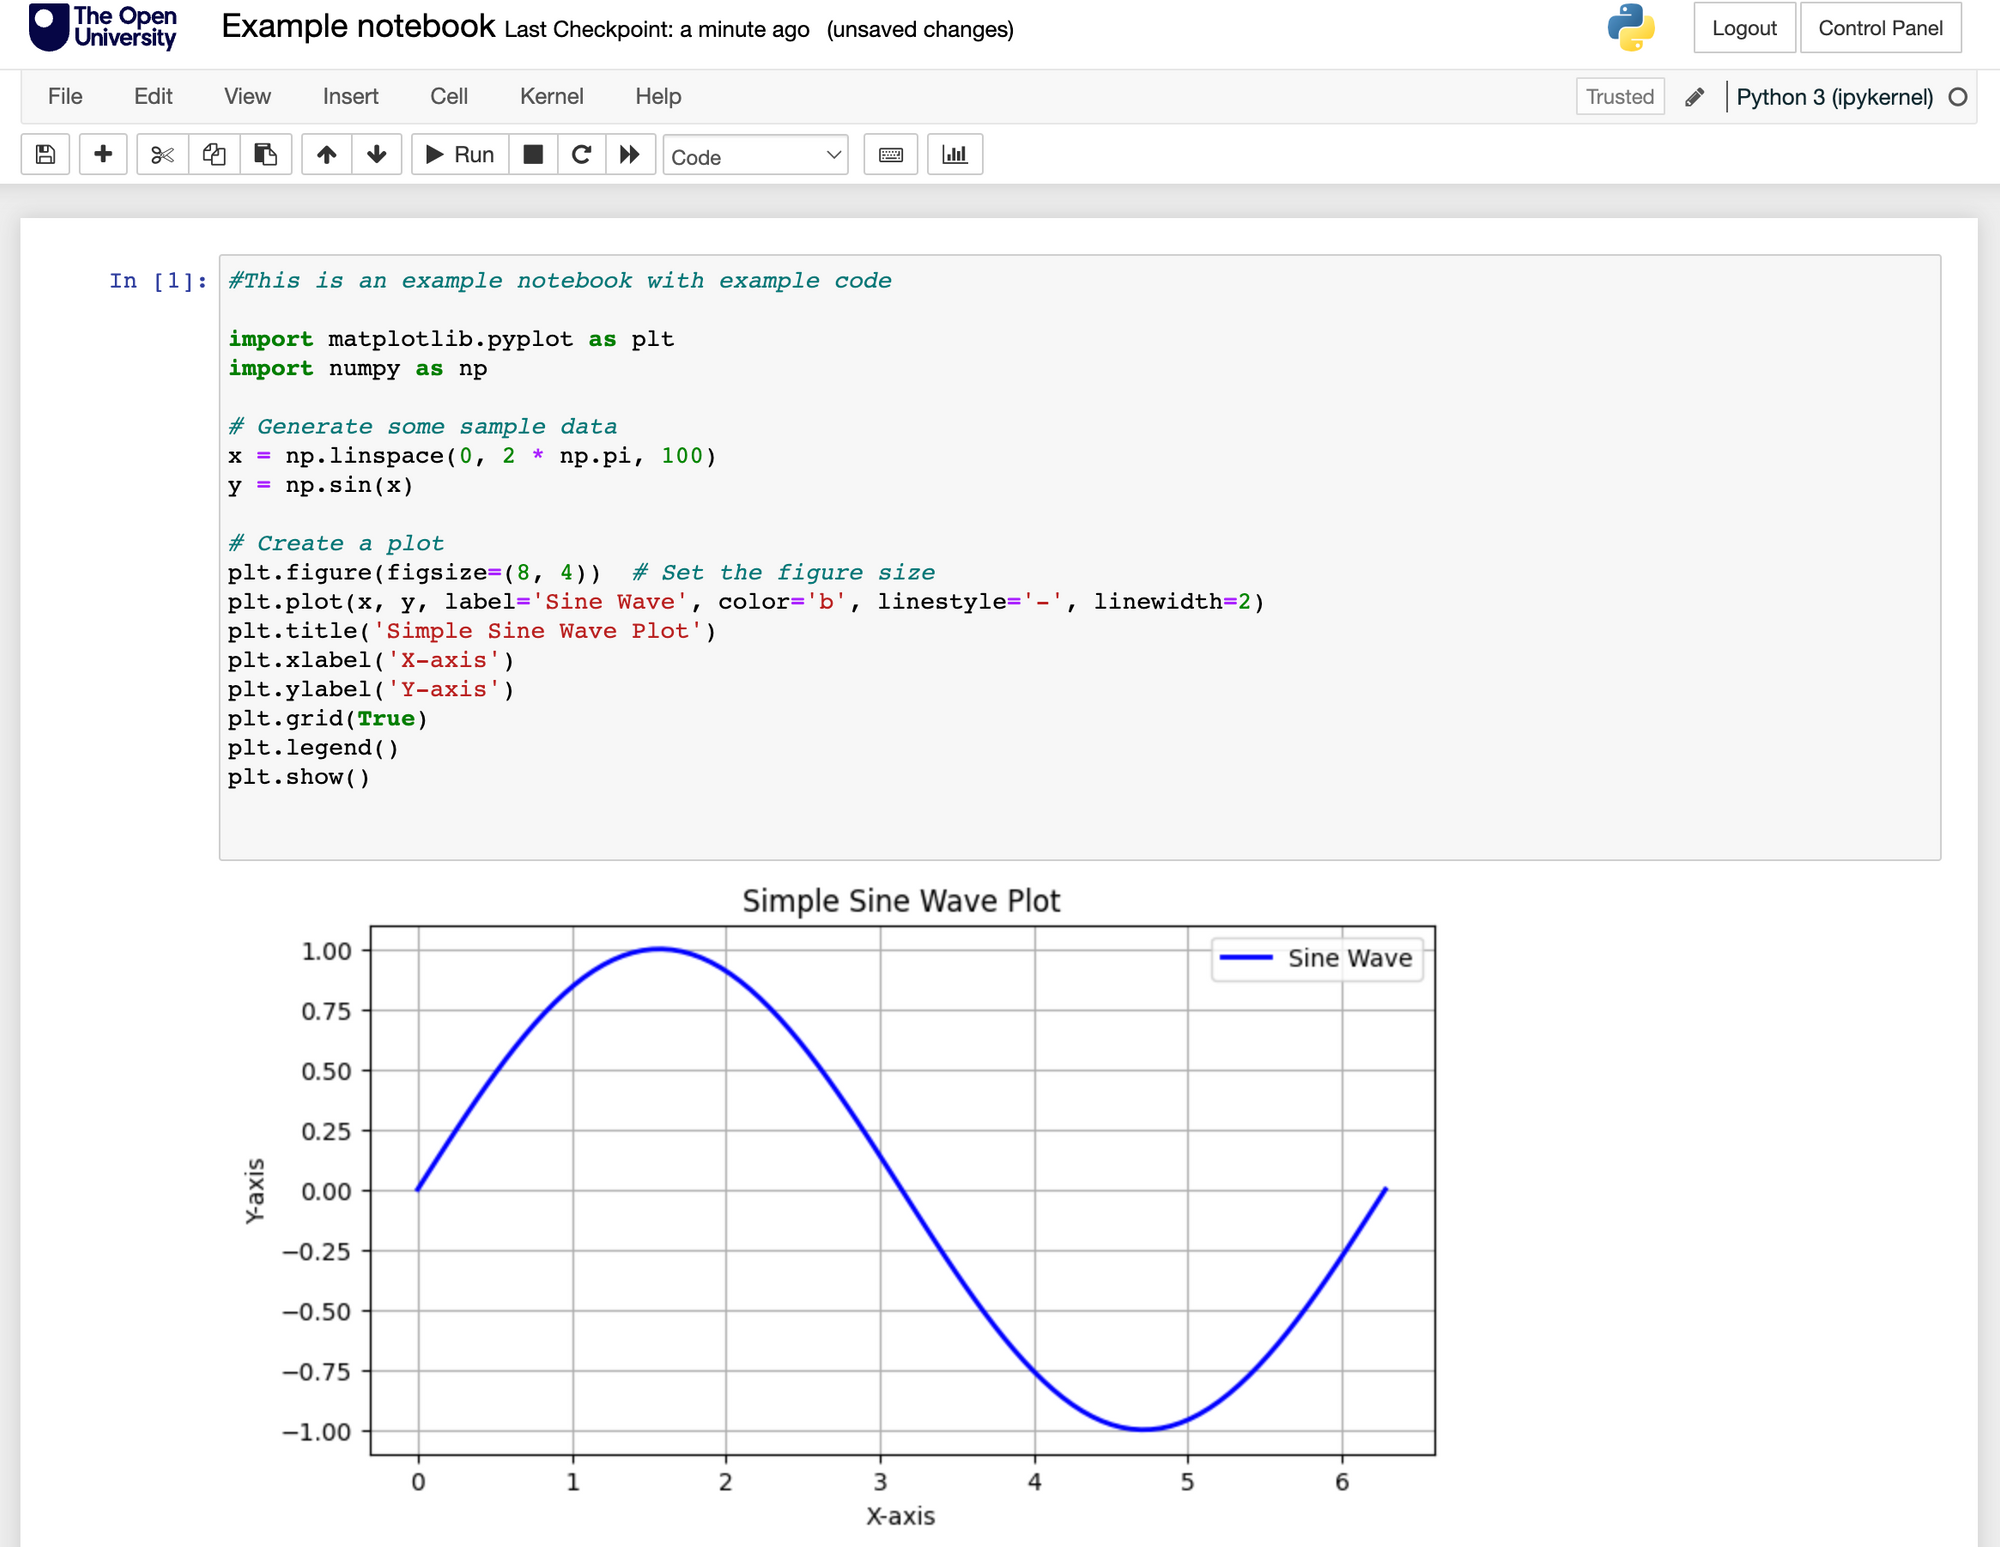 Example screenshot of a Jupyter notebook with Sine Wave code and plot. 